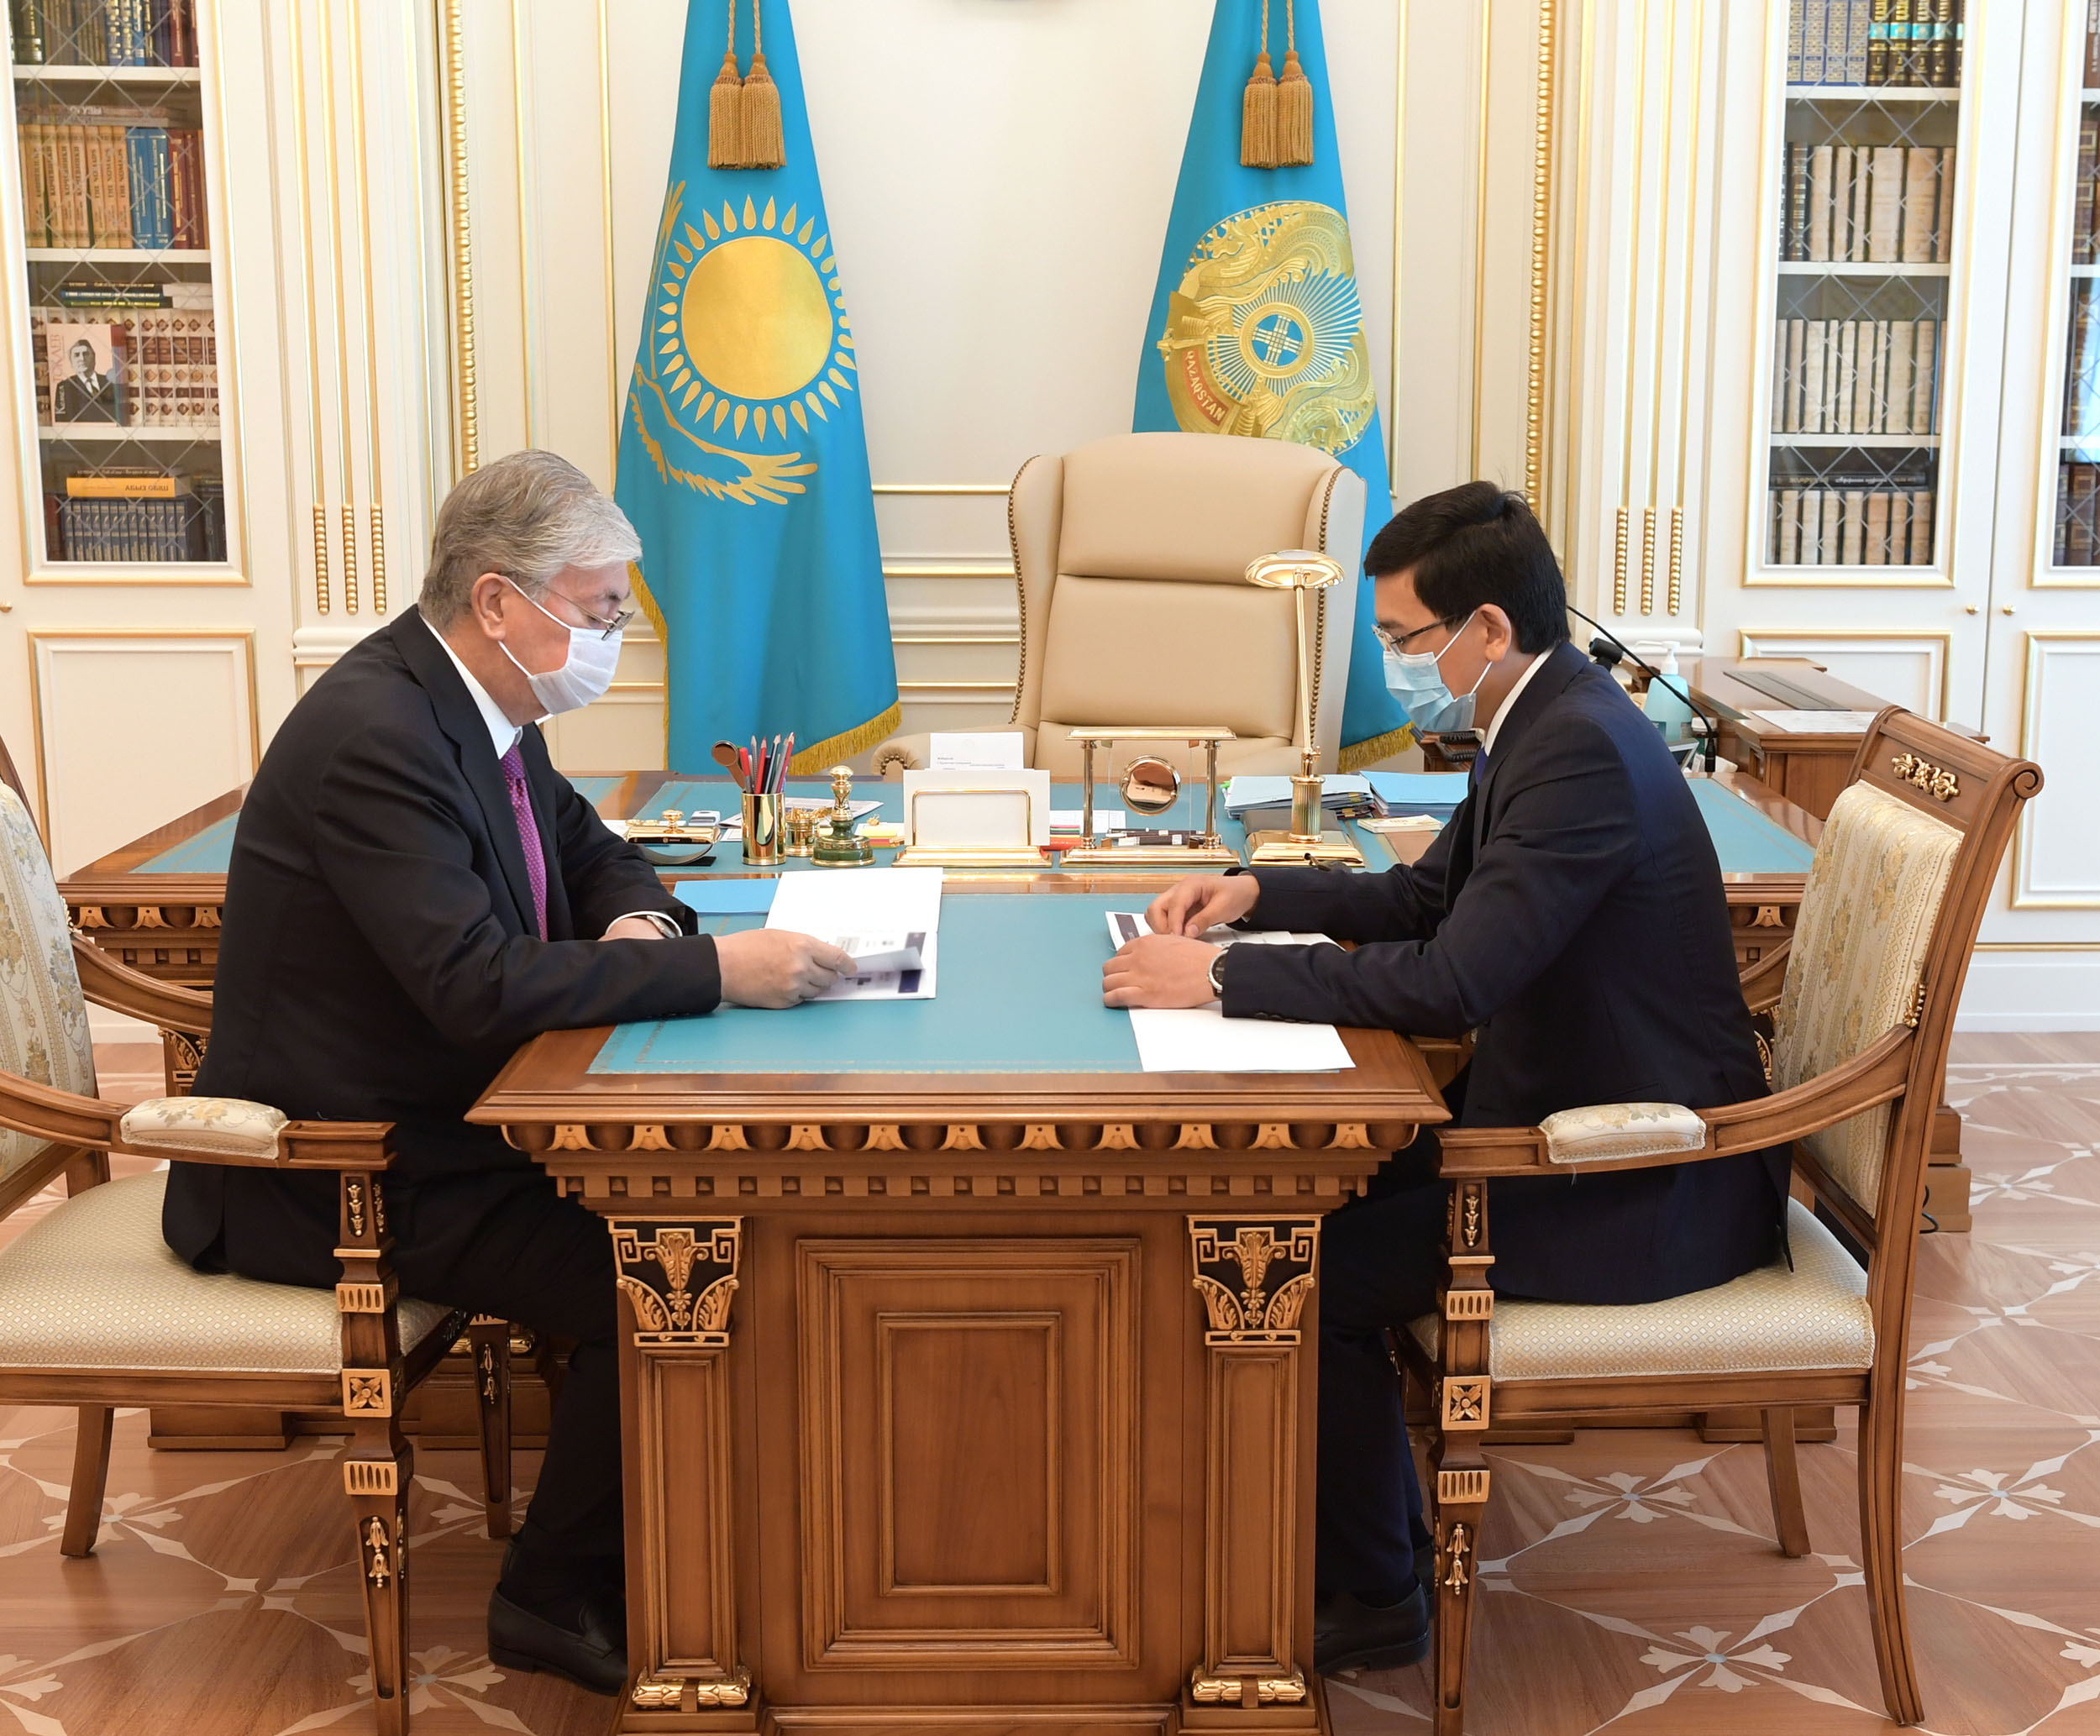 The Head of State receives Minister of Education and science